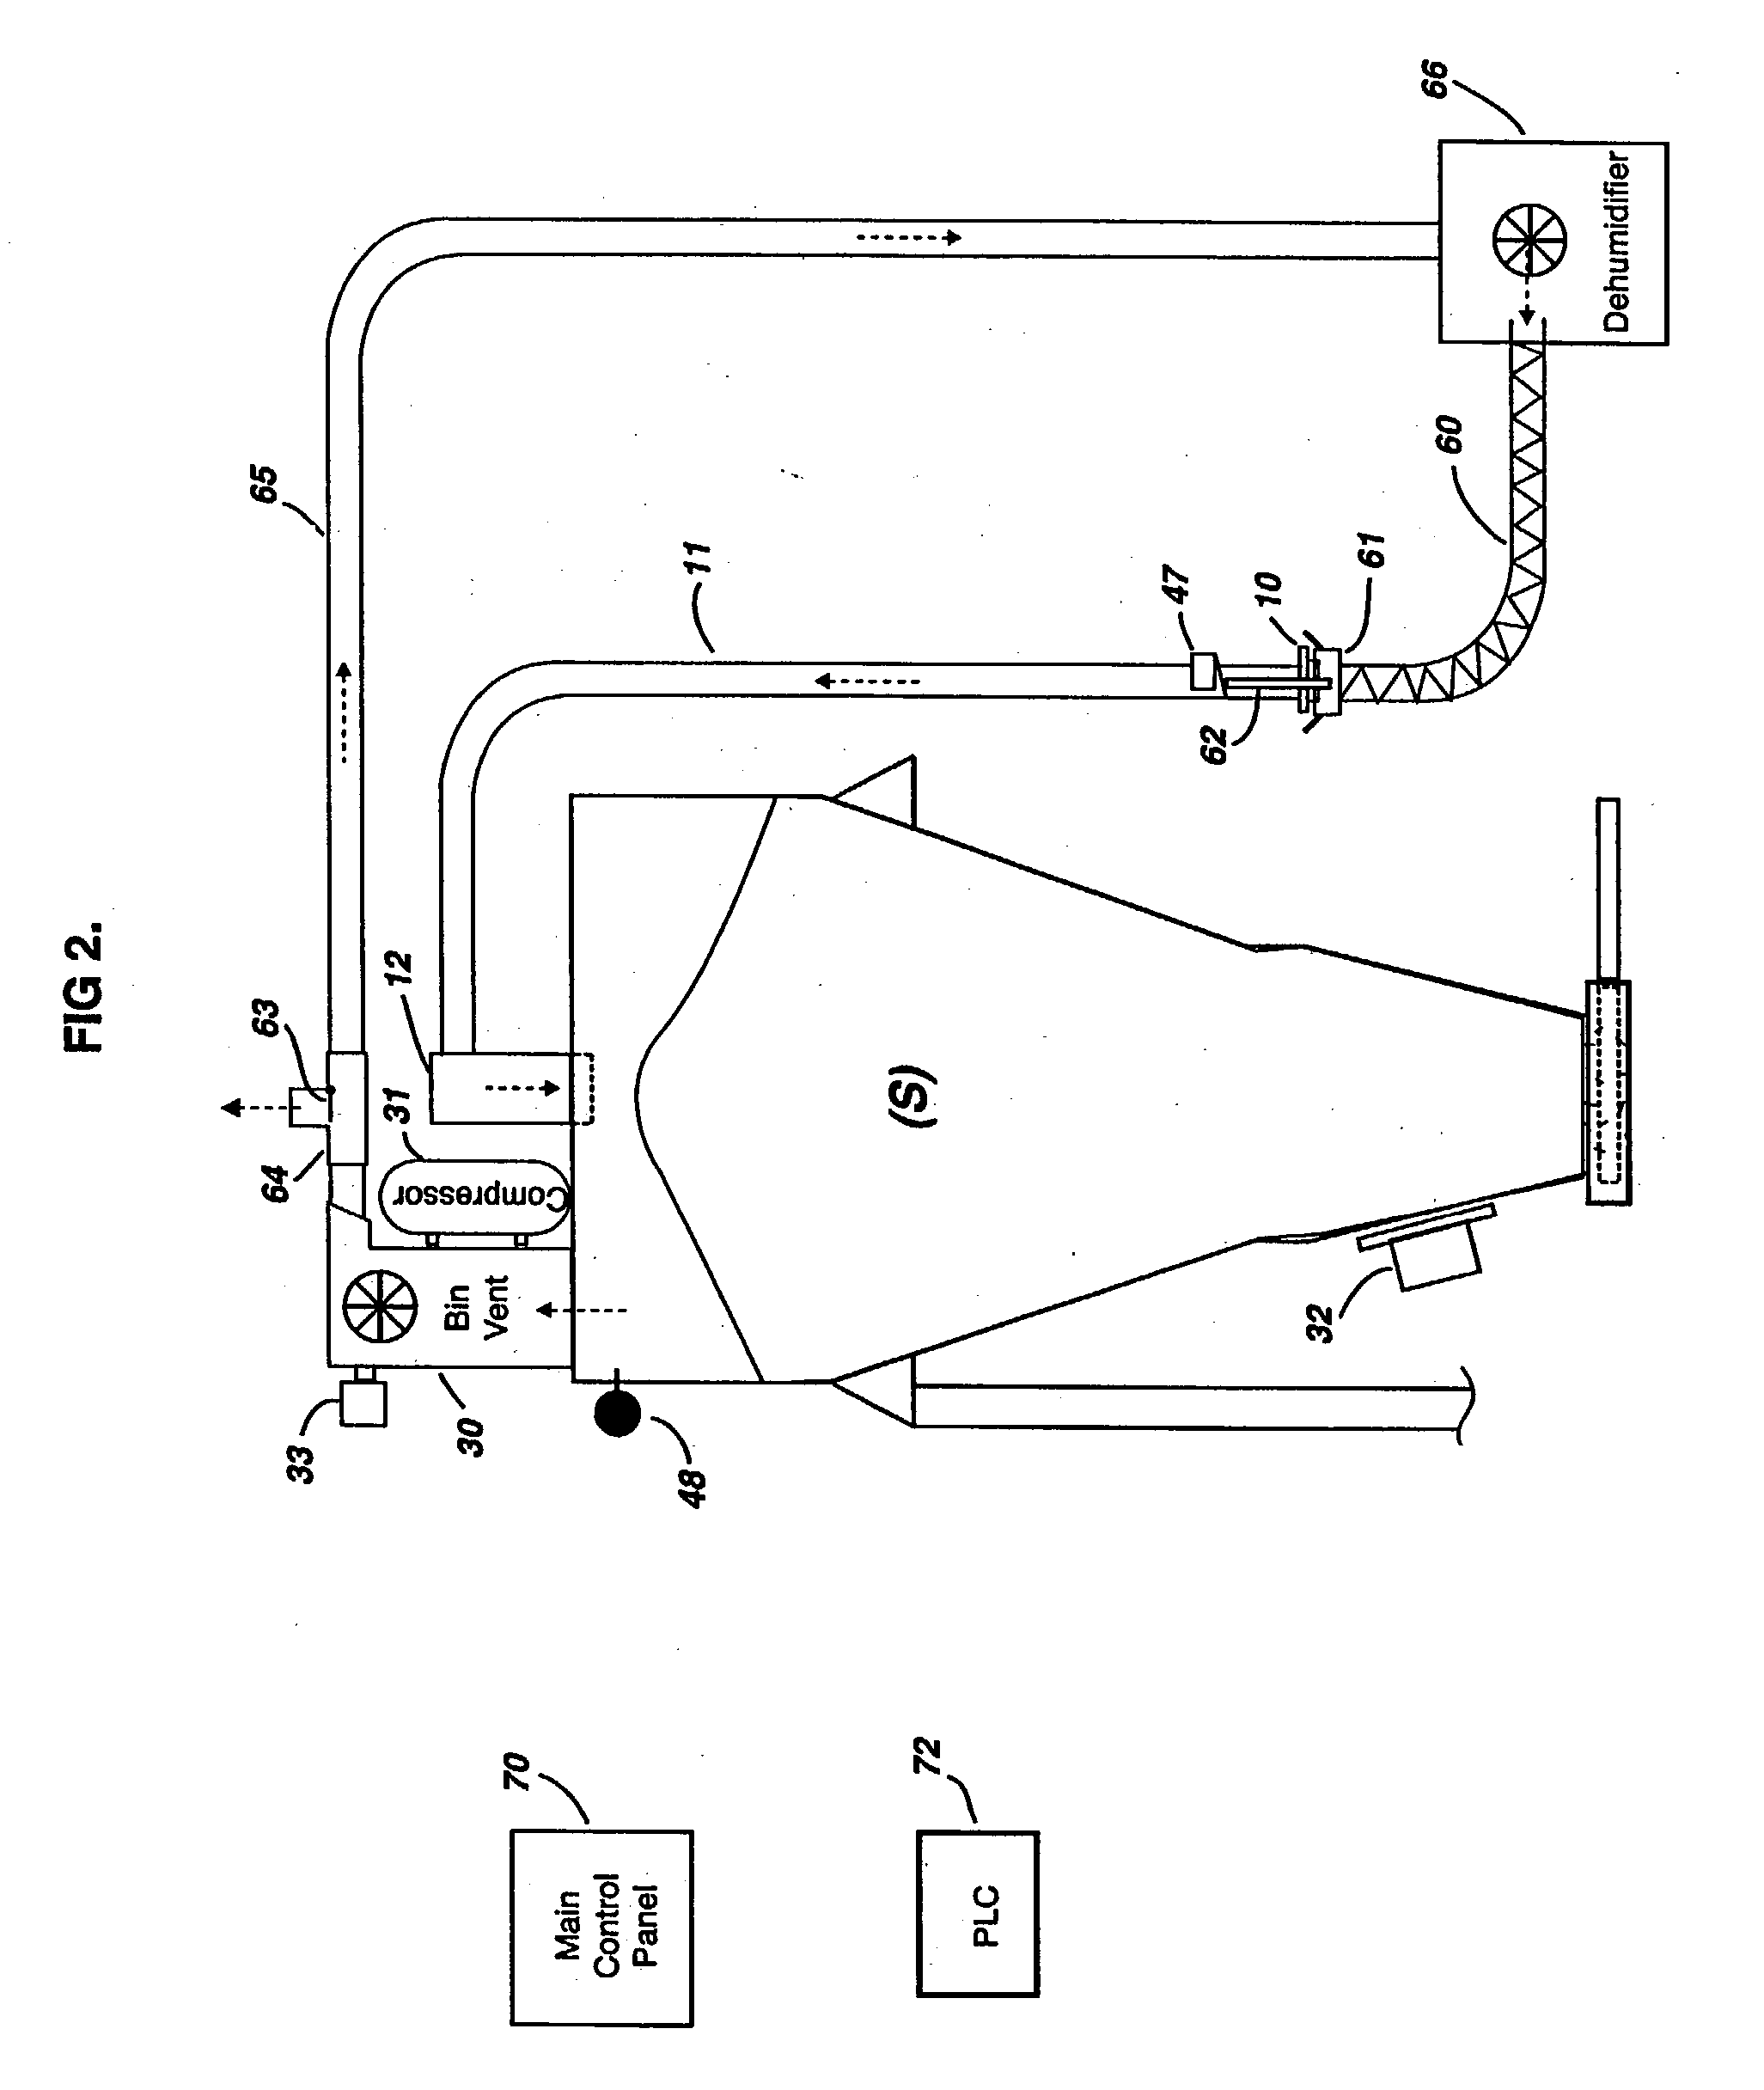 Apparatus and method for injecting dry bulk amendments for water and soil treatment